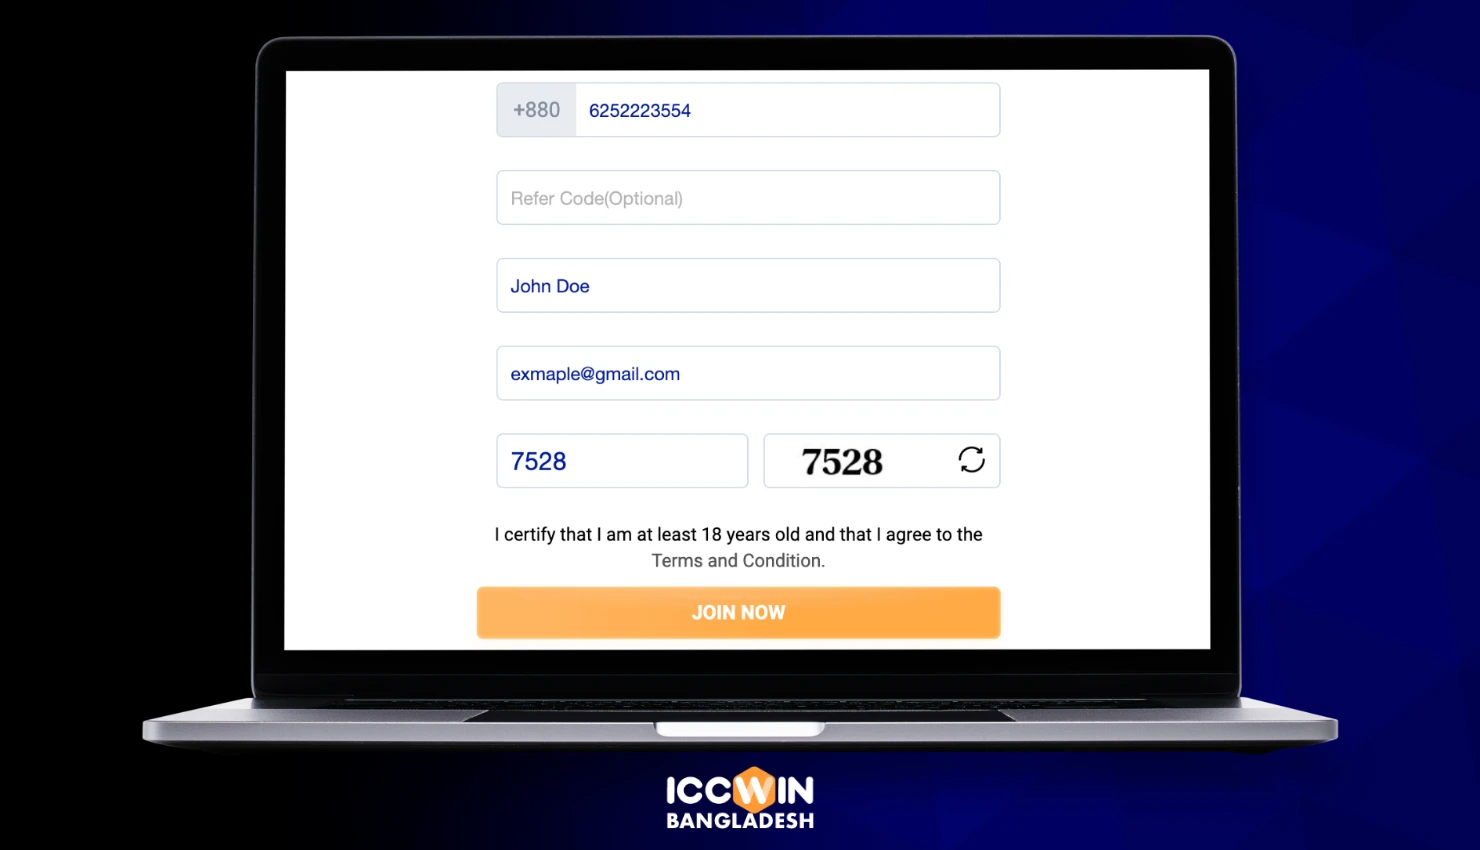 Confirm your registration on the Iccwin platform to create an account